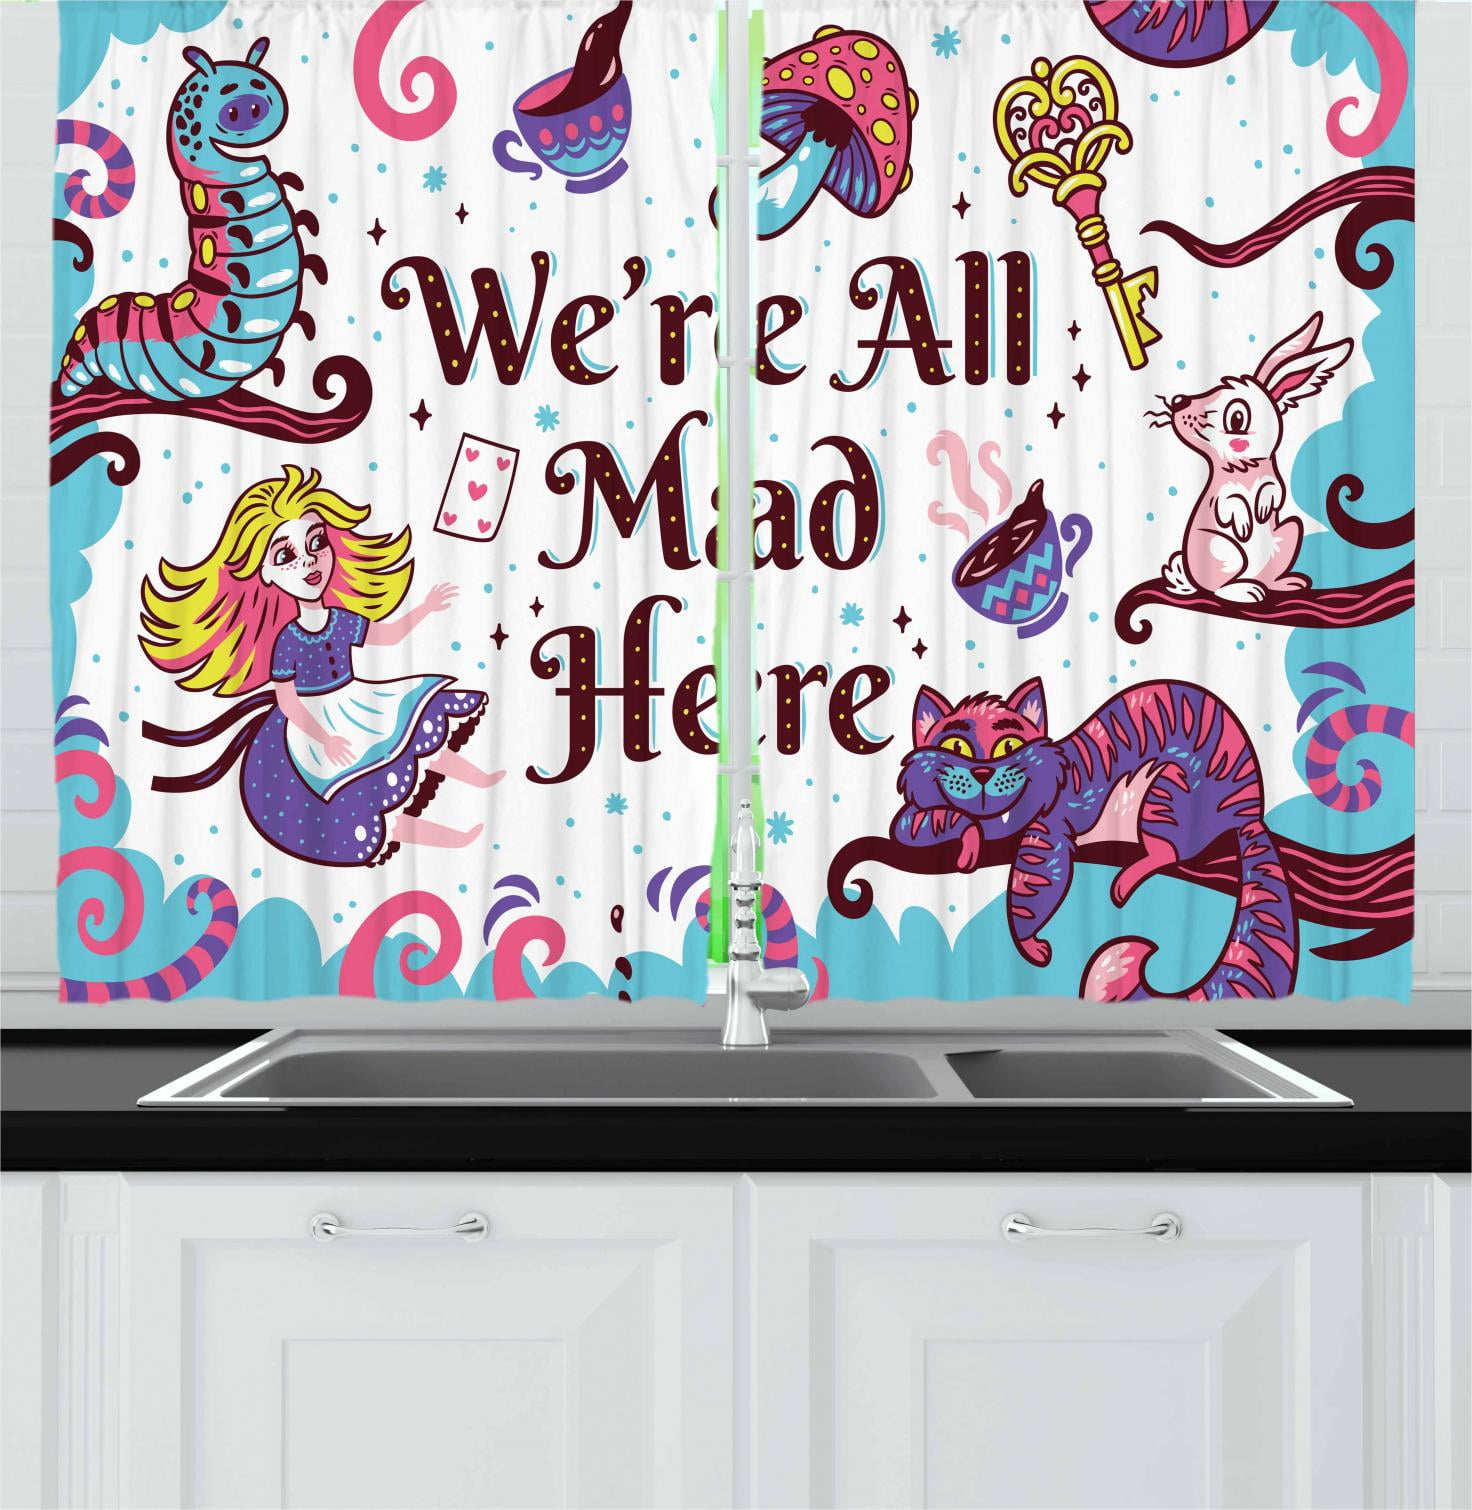 Alice In Wonderland Curtains 2 Panels Set We Are All Mad Here Quote With Caterpillar White Rabbit Cheshire Cat Window Drapes For Living Room